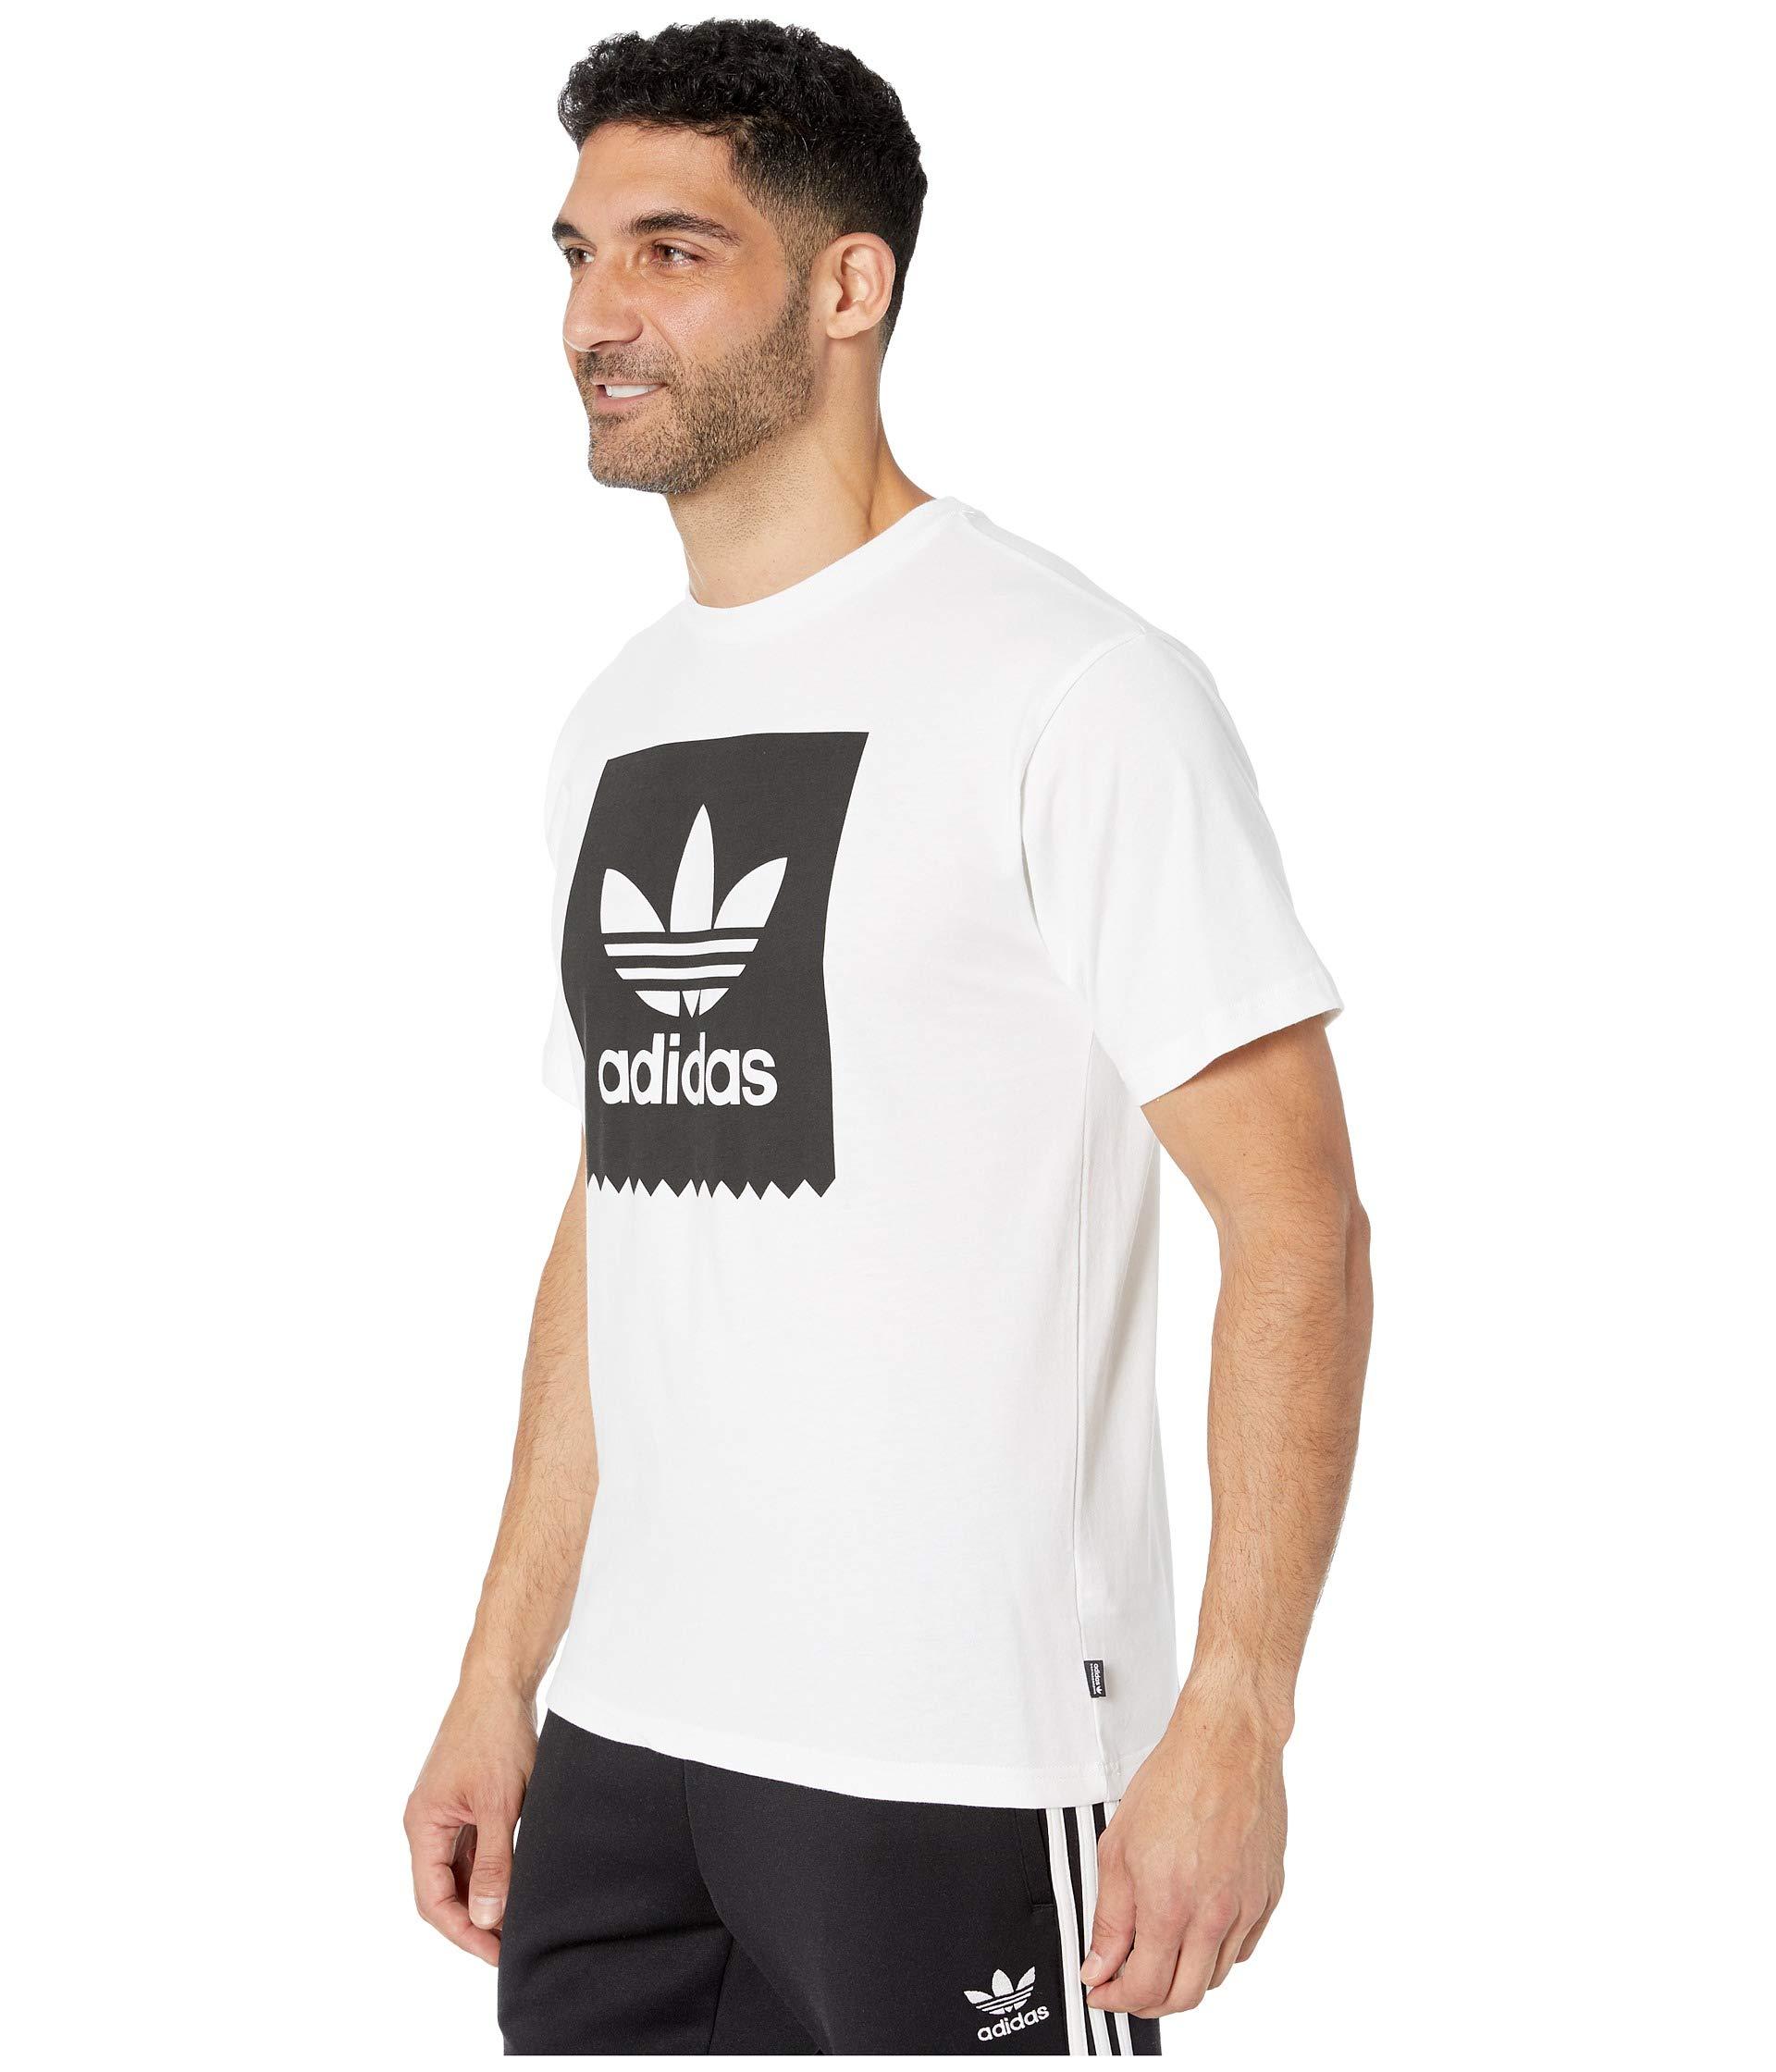 adidas Originals Cotton Solid Tee in White for Men - Save 14% - Lyst